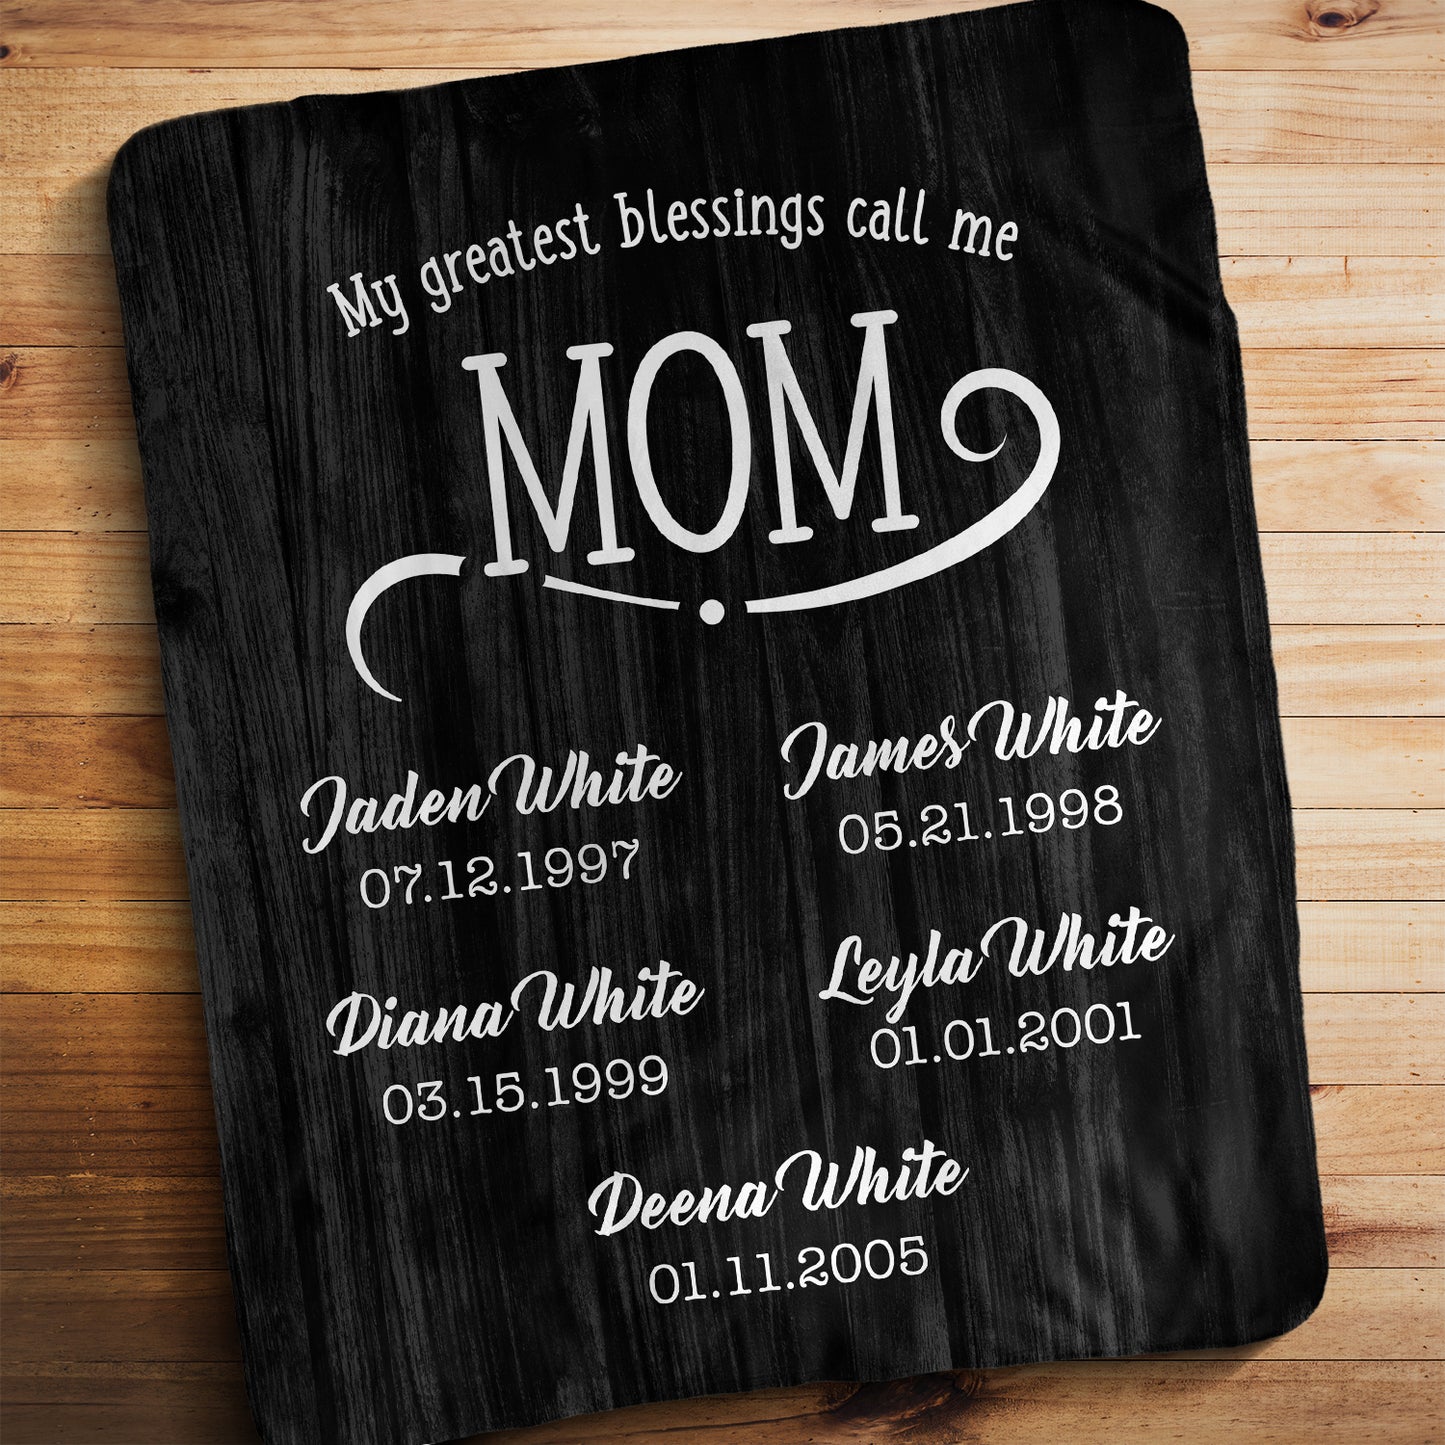 My Greatest Blessings Call Me Mom Rustic Personalized Blanket